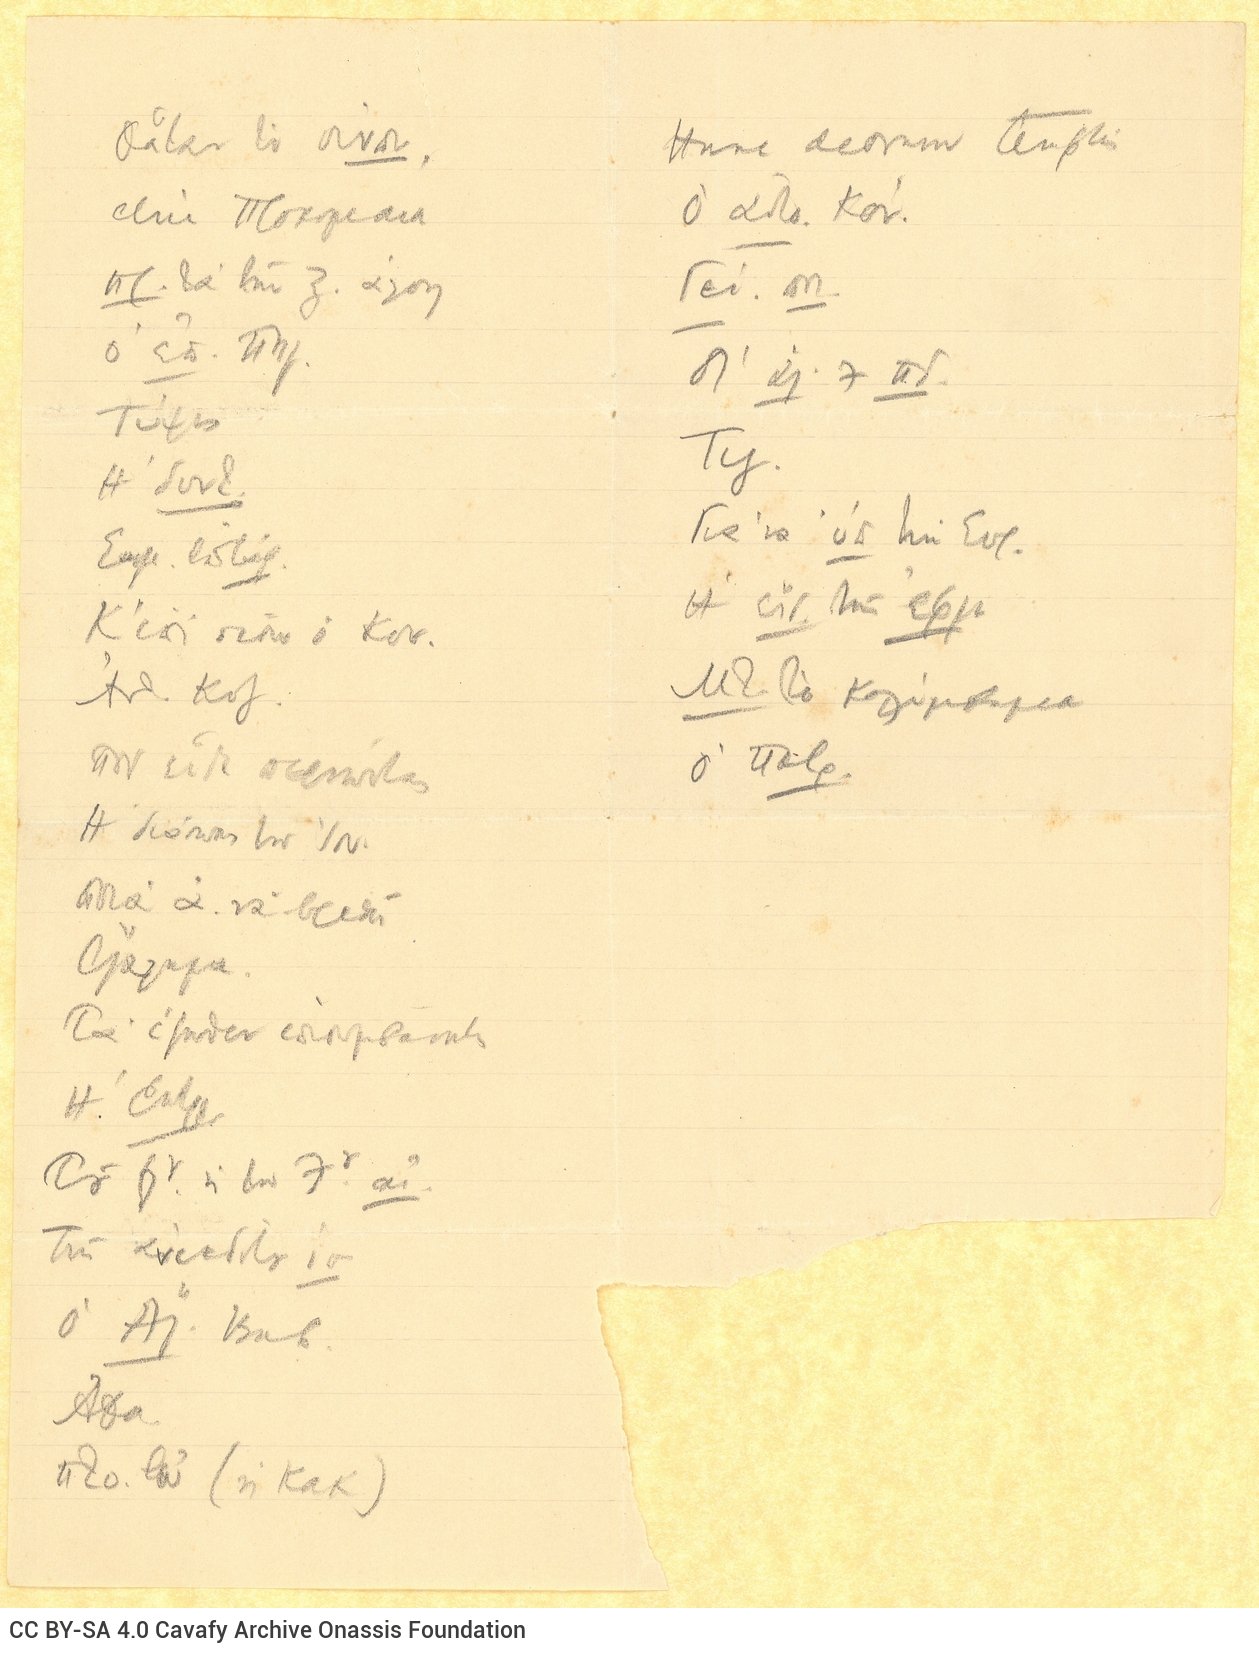 Handwritten titles of poems, most of them abbreviated, on one side of a ruled sheet. Blank verso.